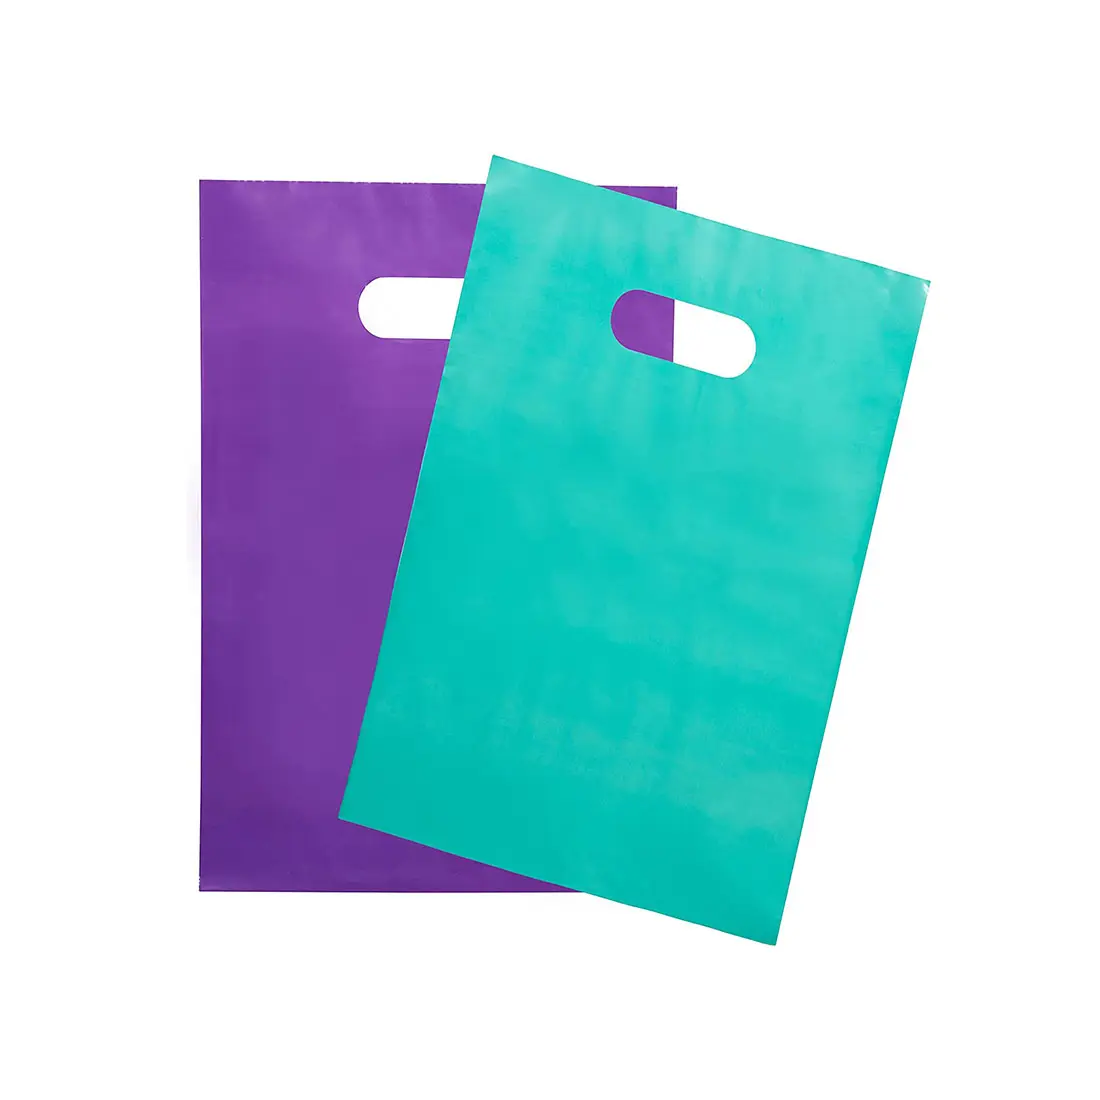 Plastic Merchandise Bag for Business, Plastic Shopping Bag with Handle, Plastic Die Cut Retail Gift Package